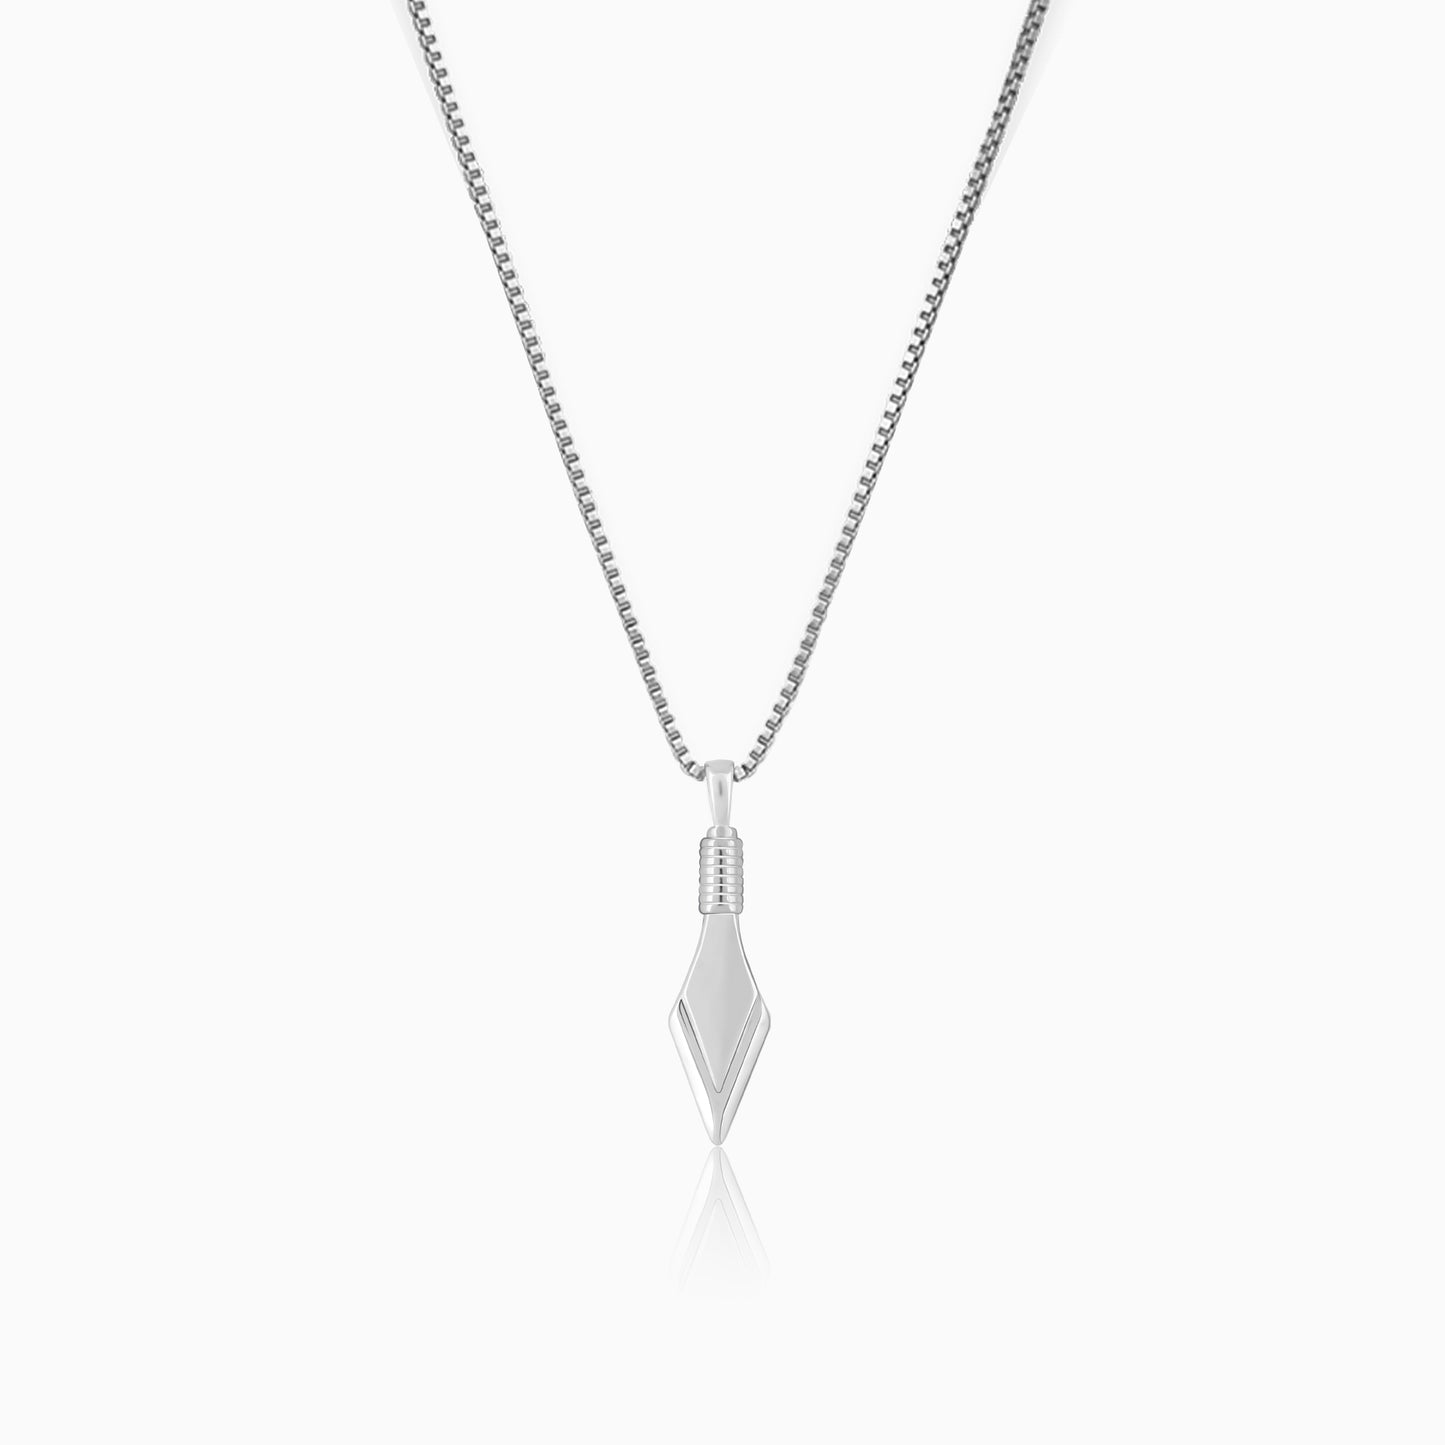 Silver Rhombus Pendant with Box Chain for Him